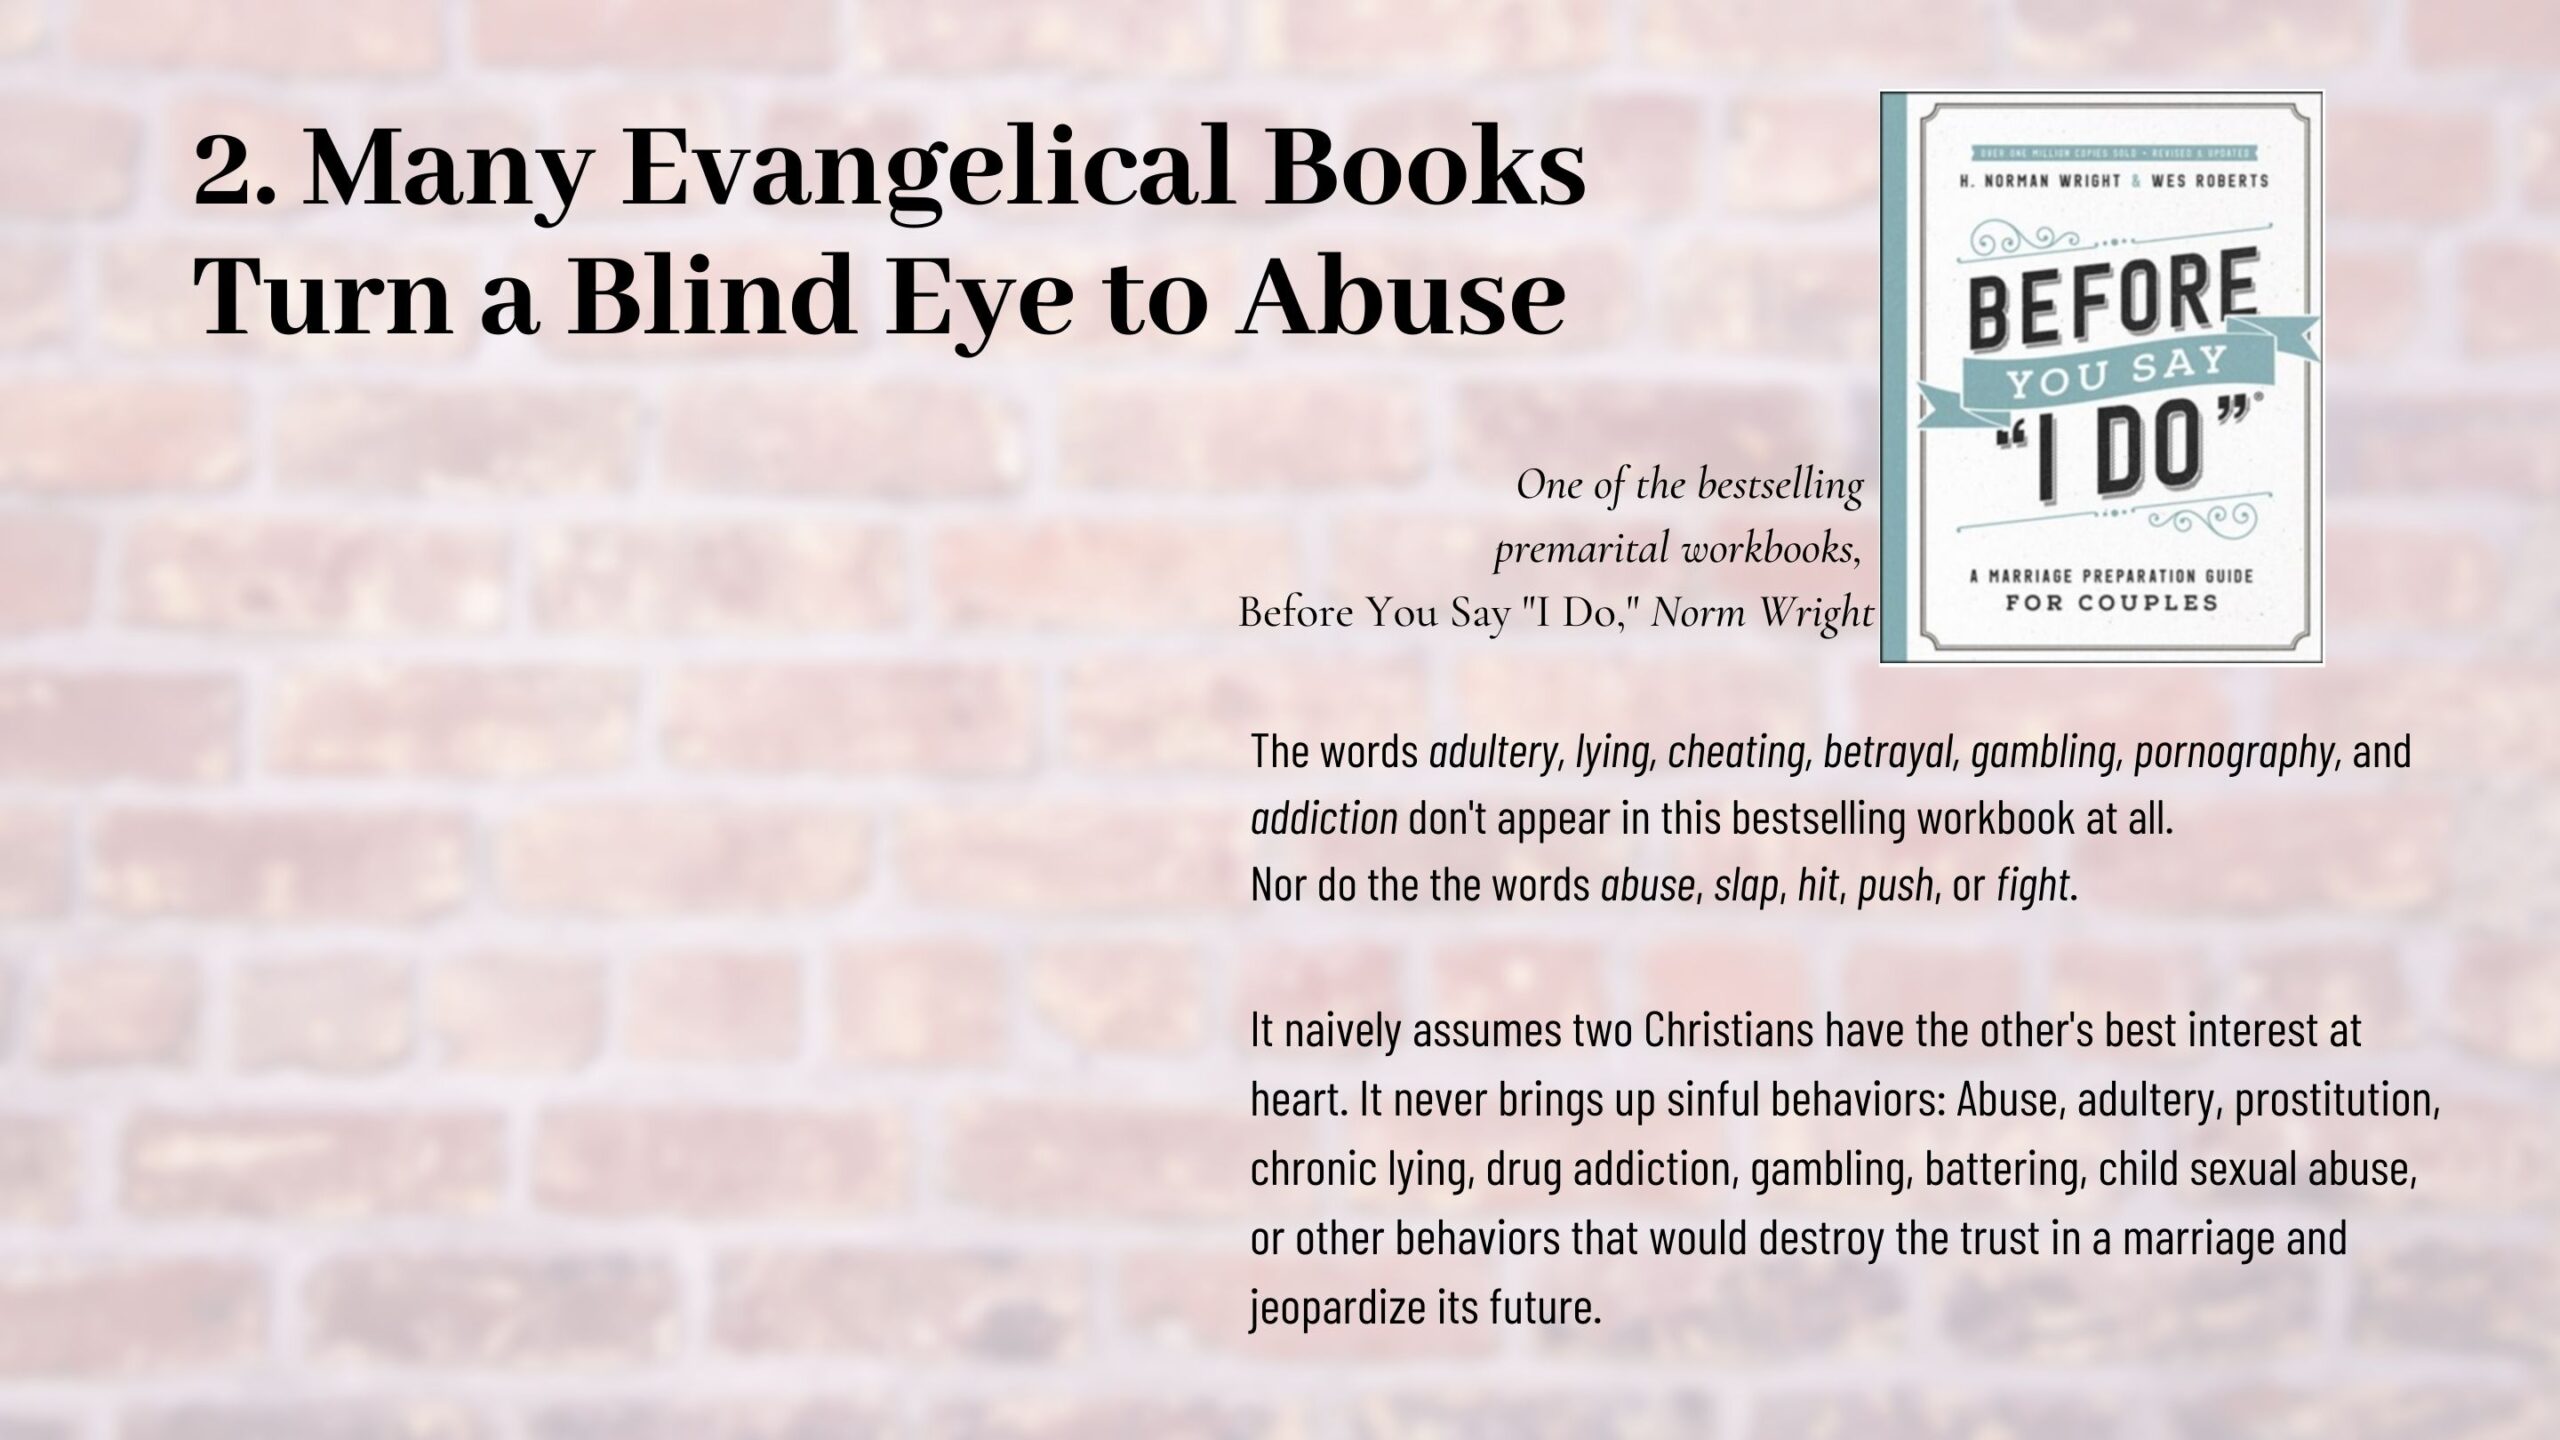 EVANGELICAL books often ignore the topic of abuse and other serious problems. 